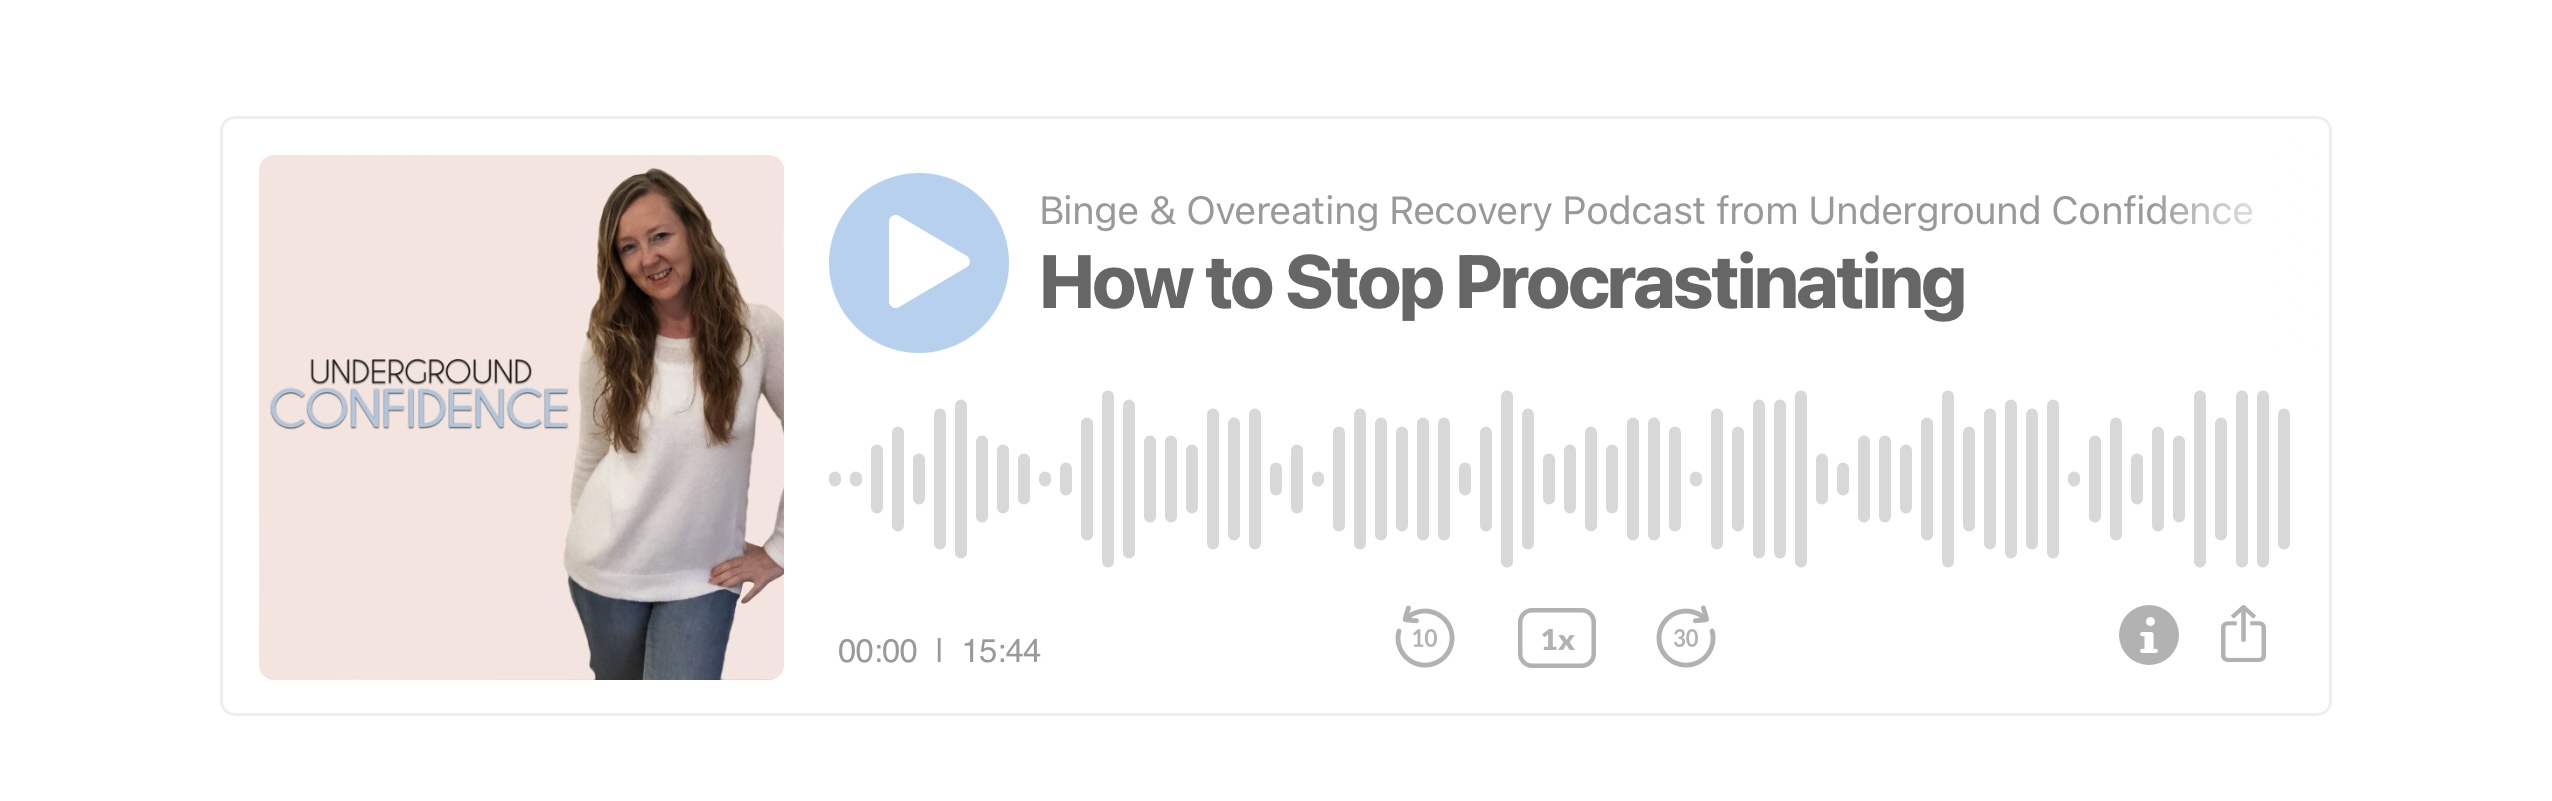 How to stop procrastinating podcast button